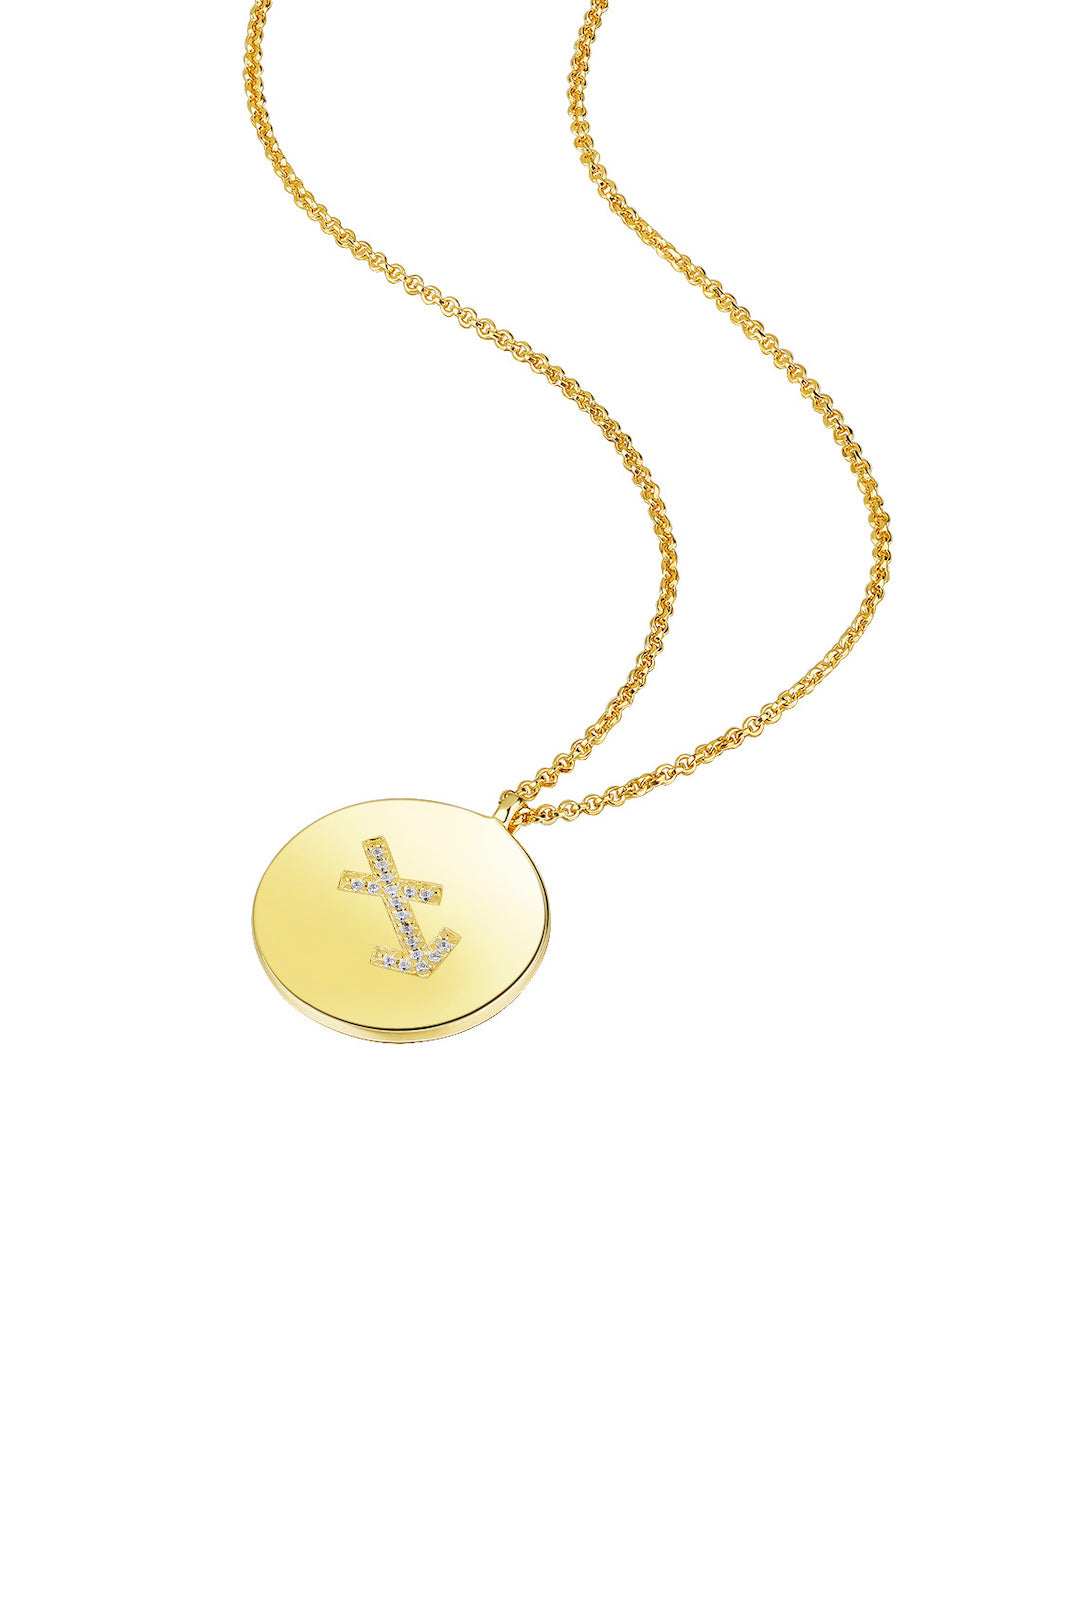 Gold Plated Silver Zodiac Necklace - Sagittarius Side View